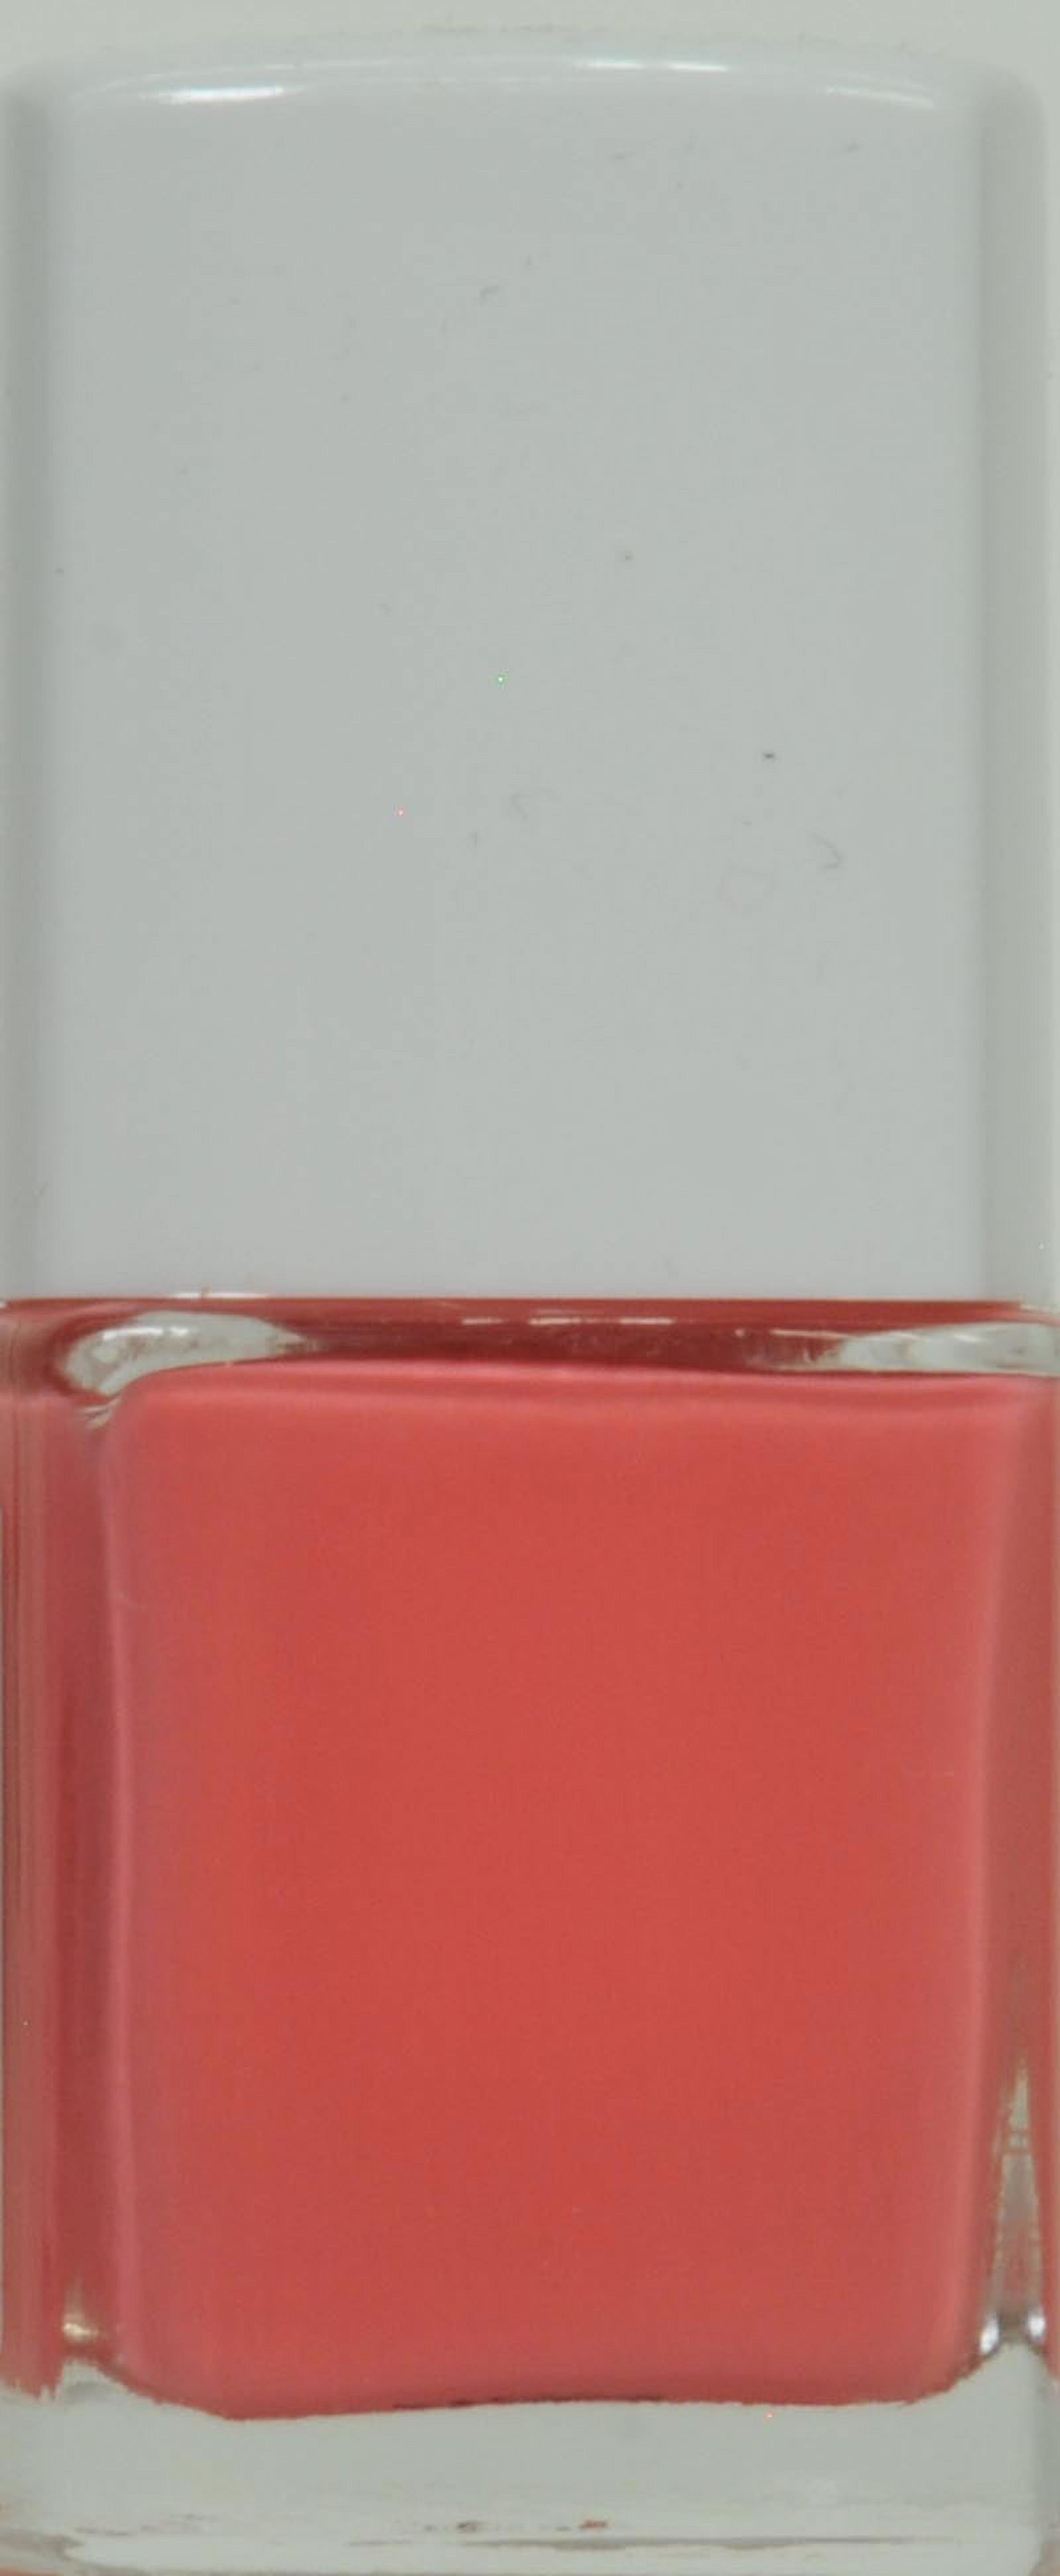 Flower Nail'd It Nail Lacquer, 0.4 fl oz - image 3 of 4